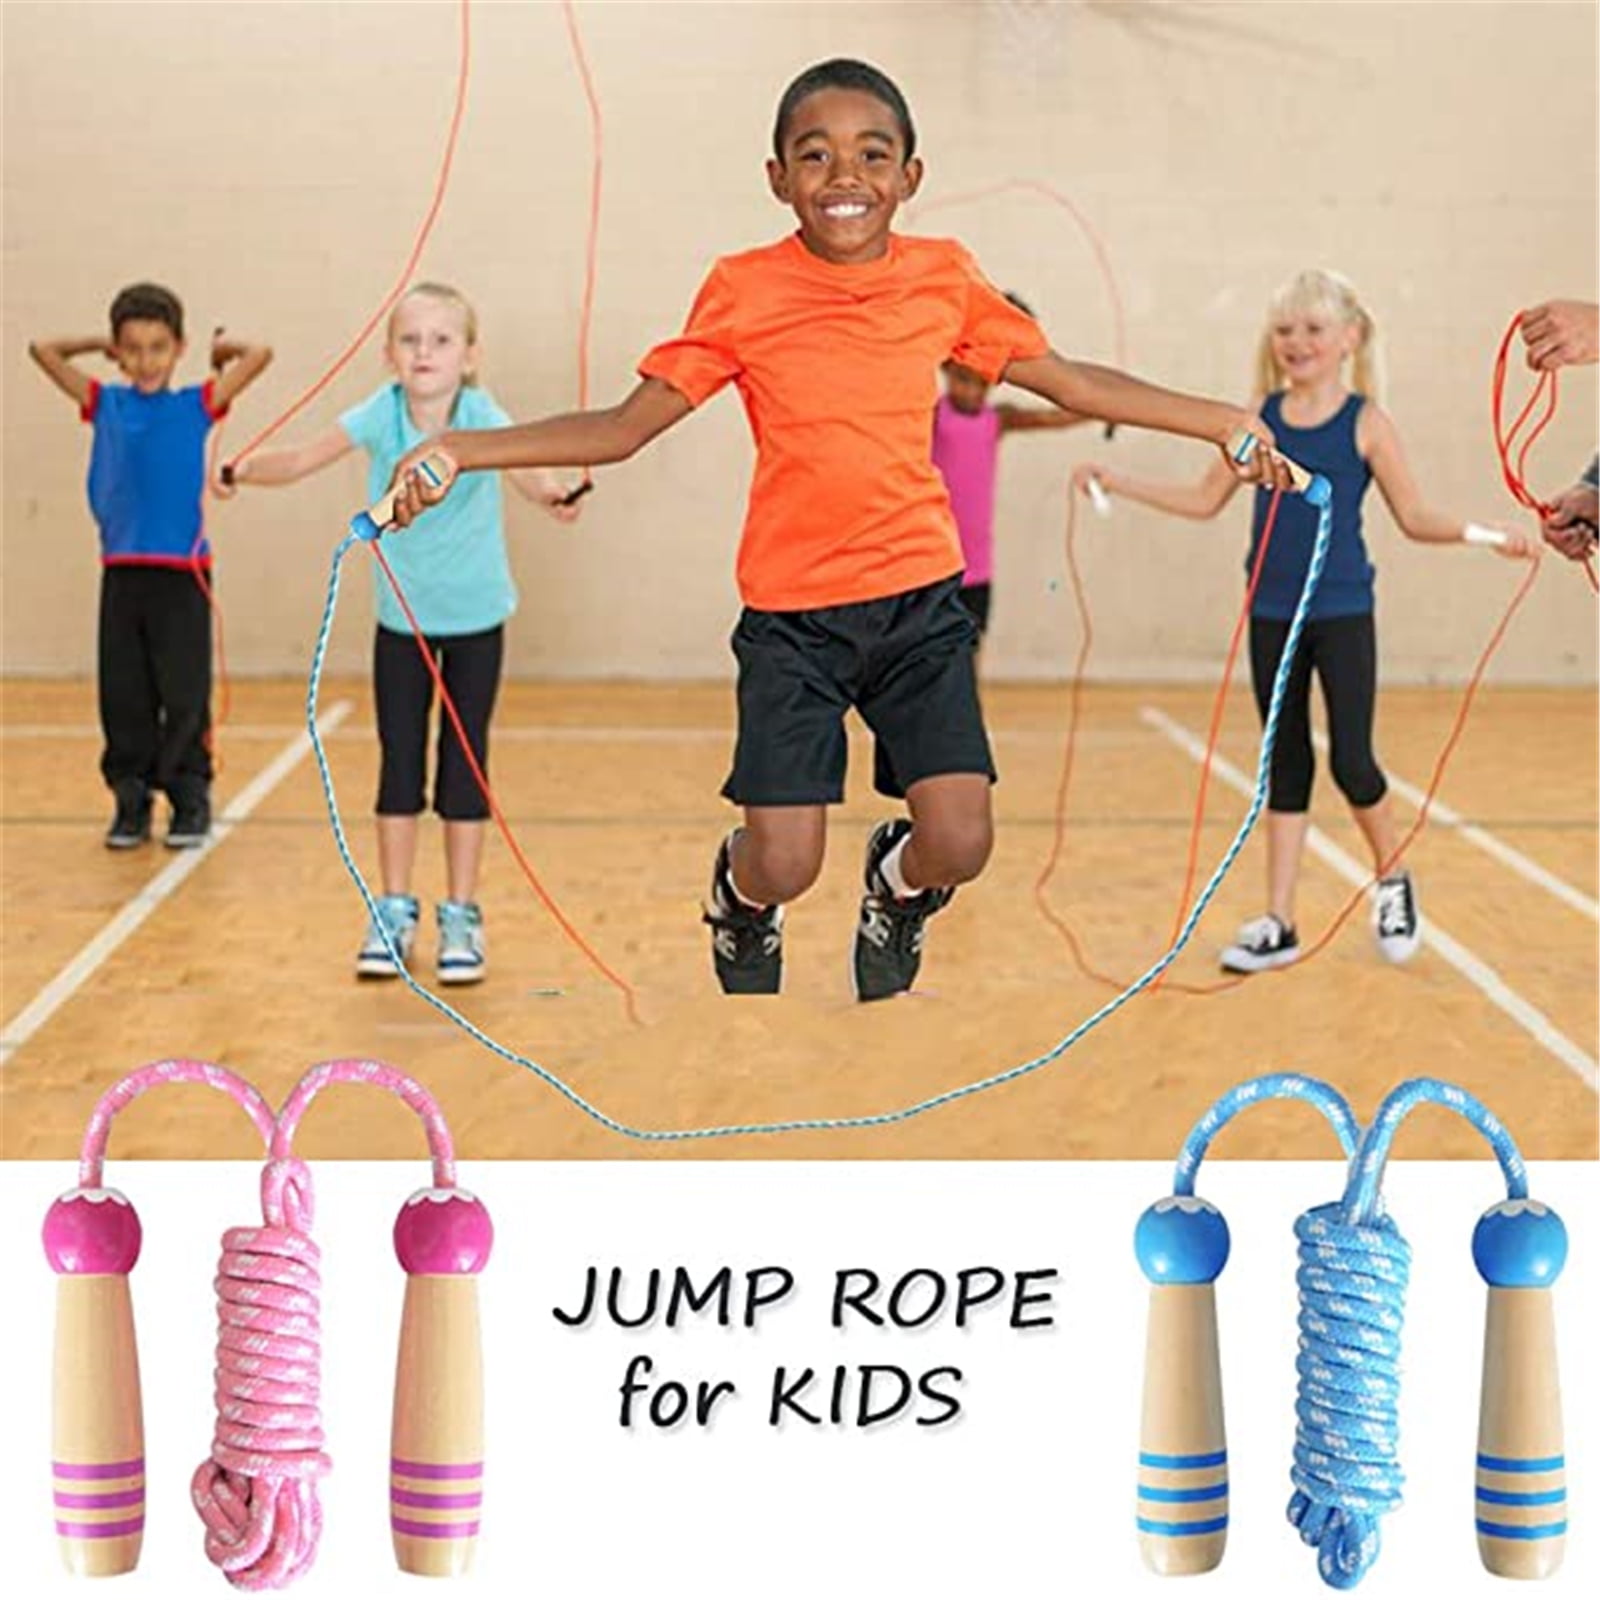 Kids Wooden Skipping Rope Children Exercise Jumping Game Fitness Boxing Gym UK 